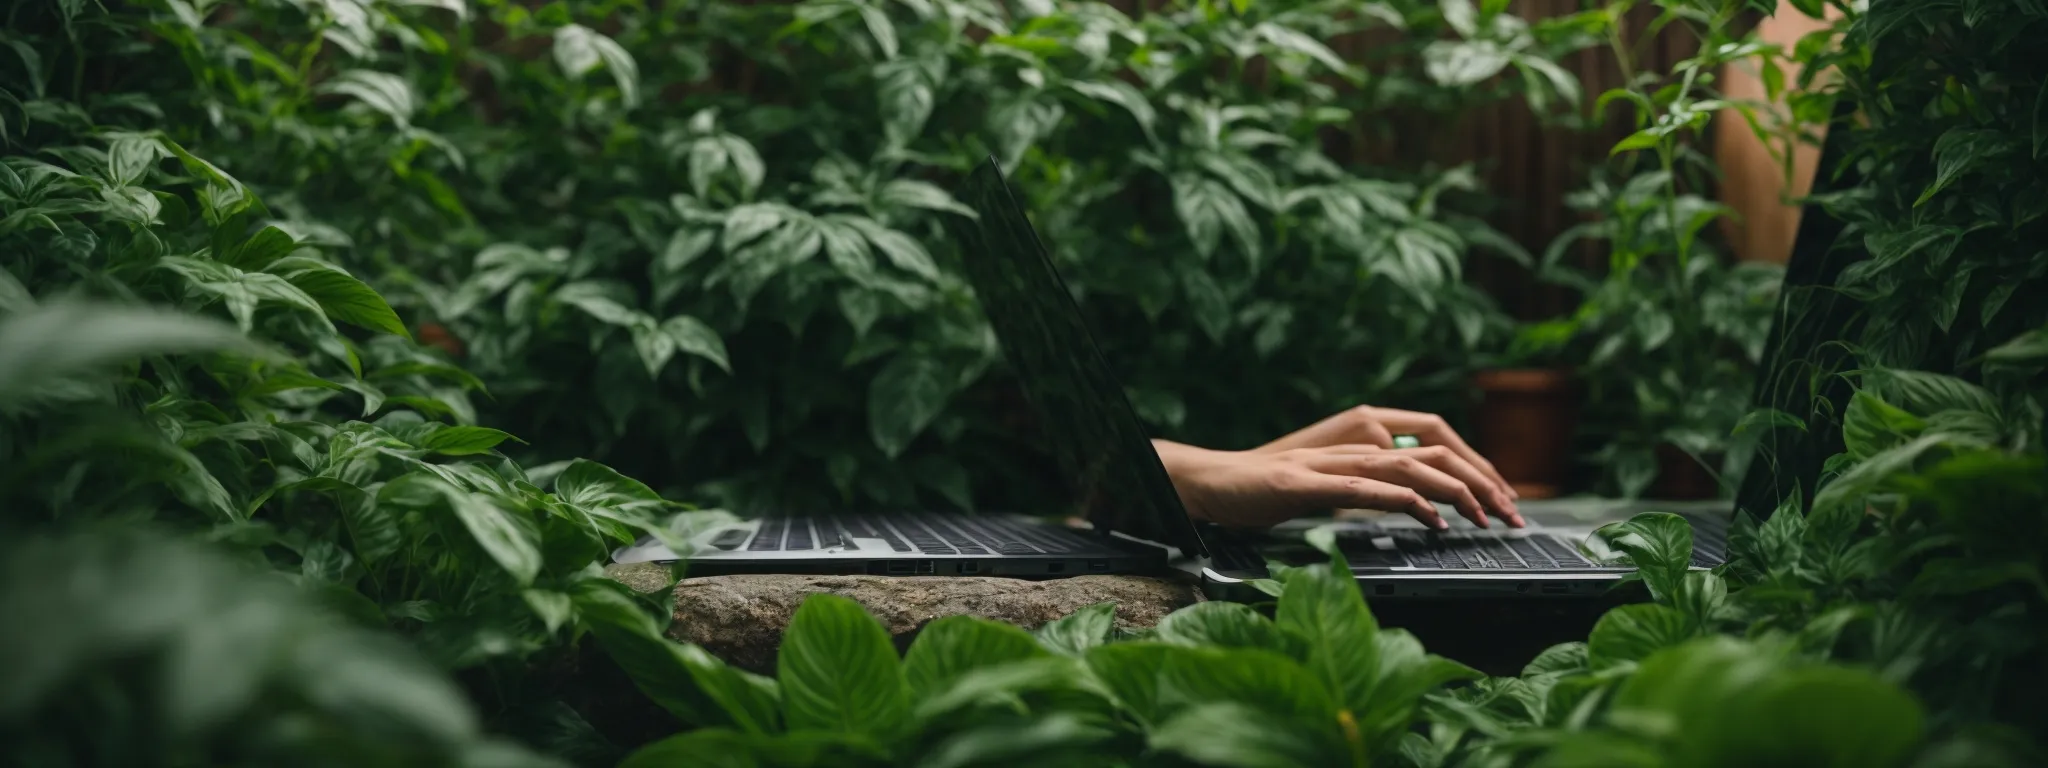 a person typing on a laptop surrounded by green plants symbolizing the growth potential through seo optimization on a wordpress blog.